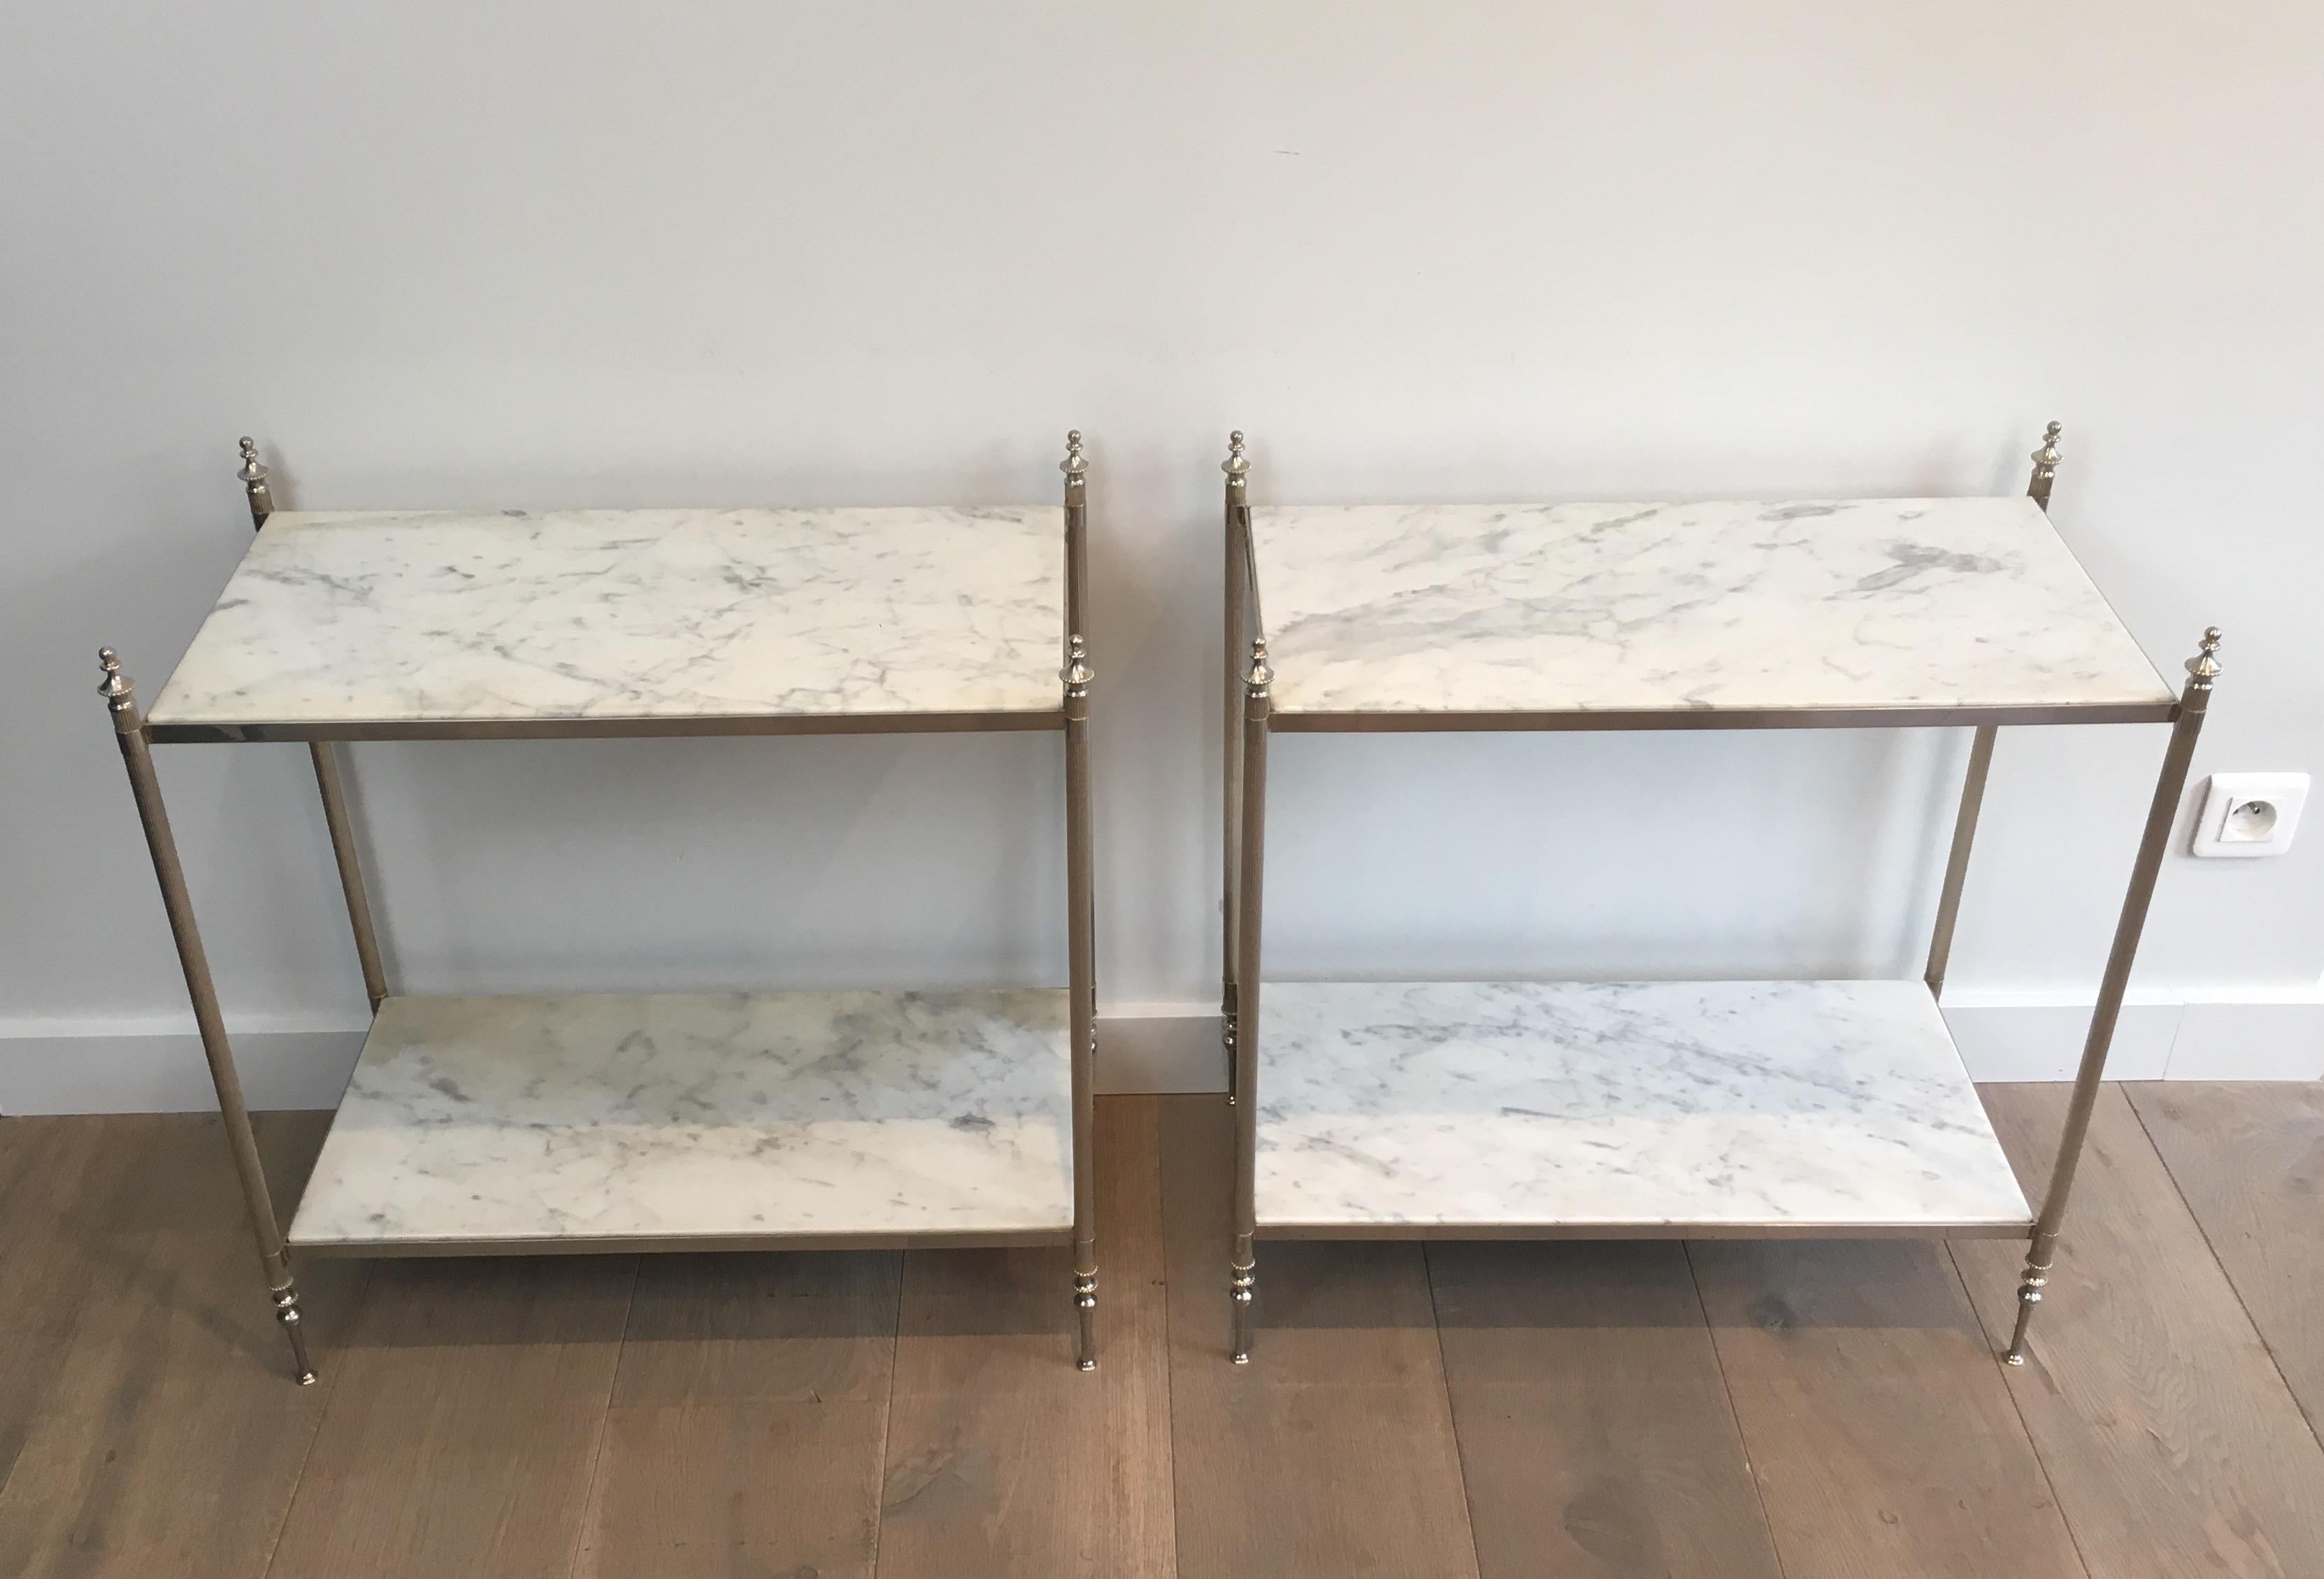 This rare and beautiful neoclassical pair of side tables is made of silvered metal with 2 very nice Carrara marble tops. These end tables are French, in the style of famous French designer Maison Jansen, circa 1940.